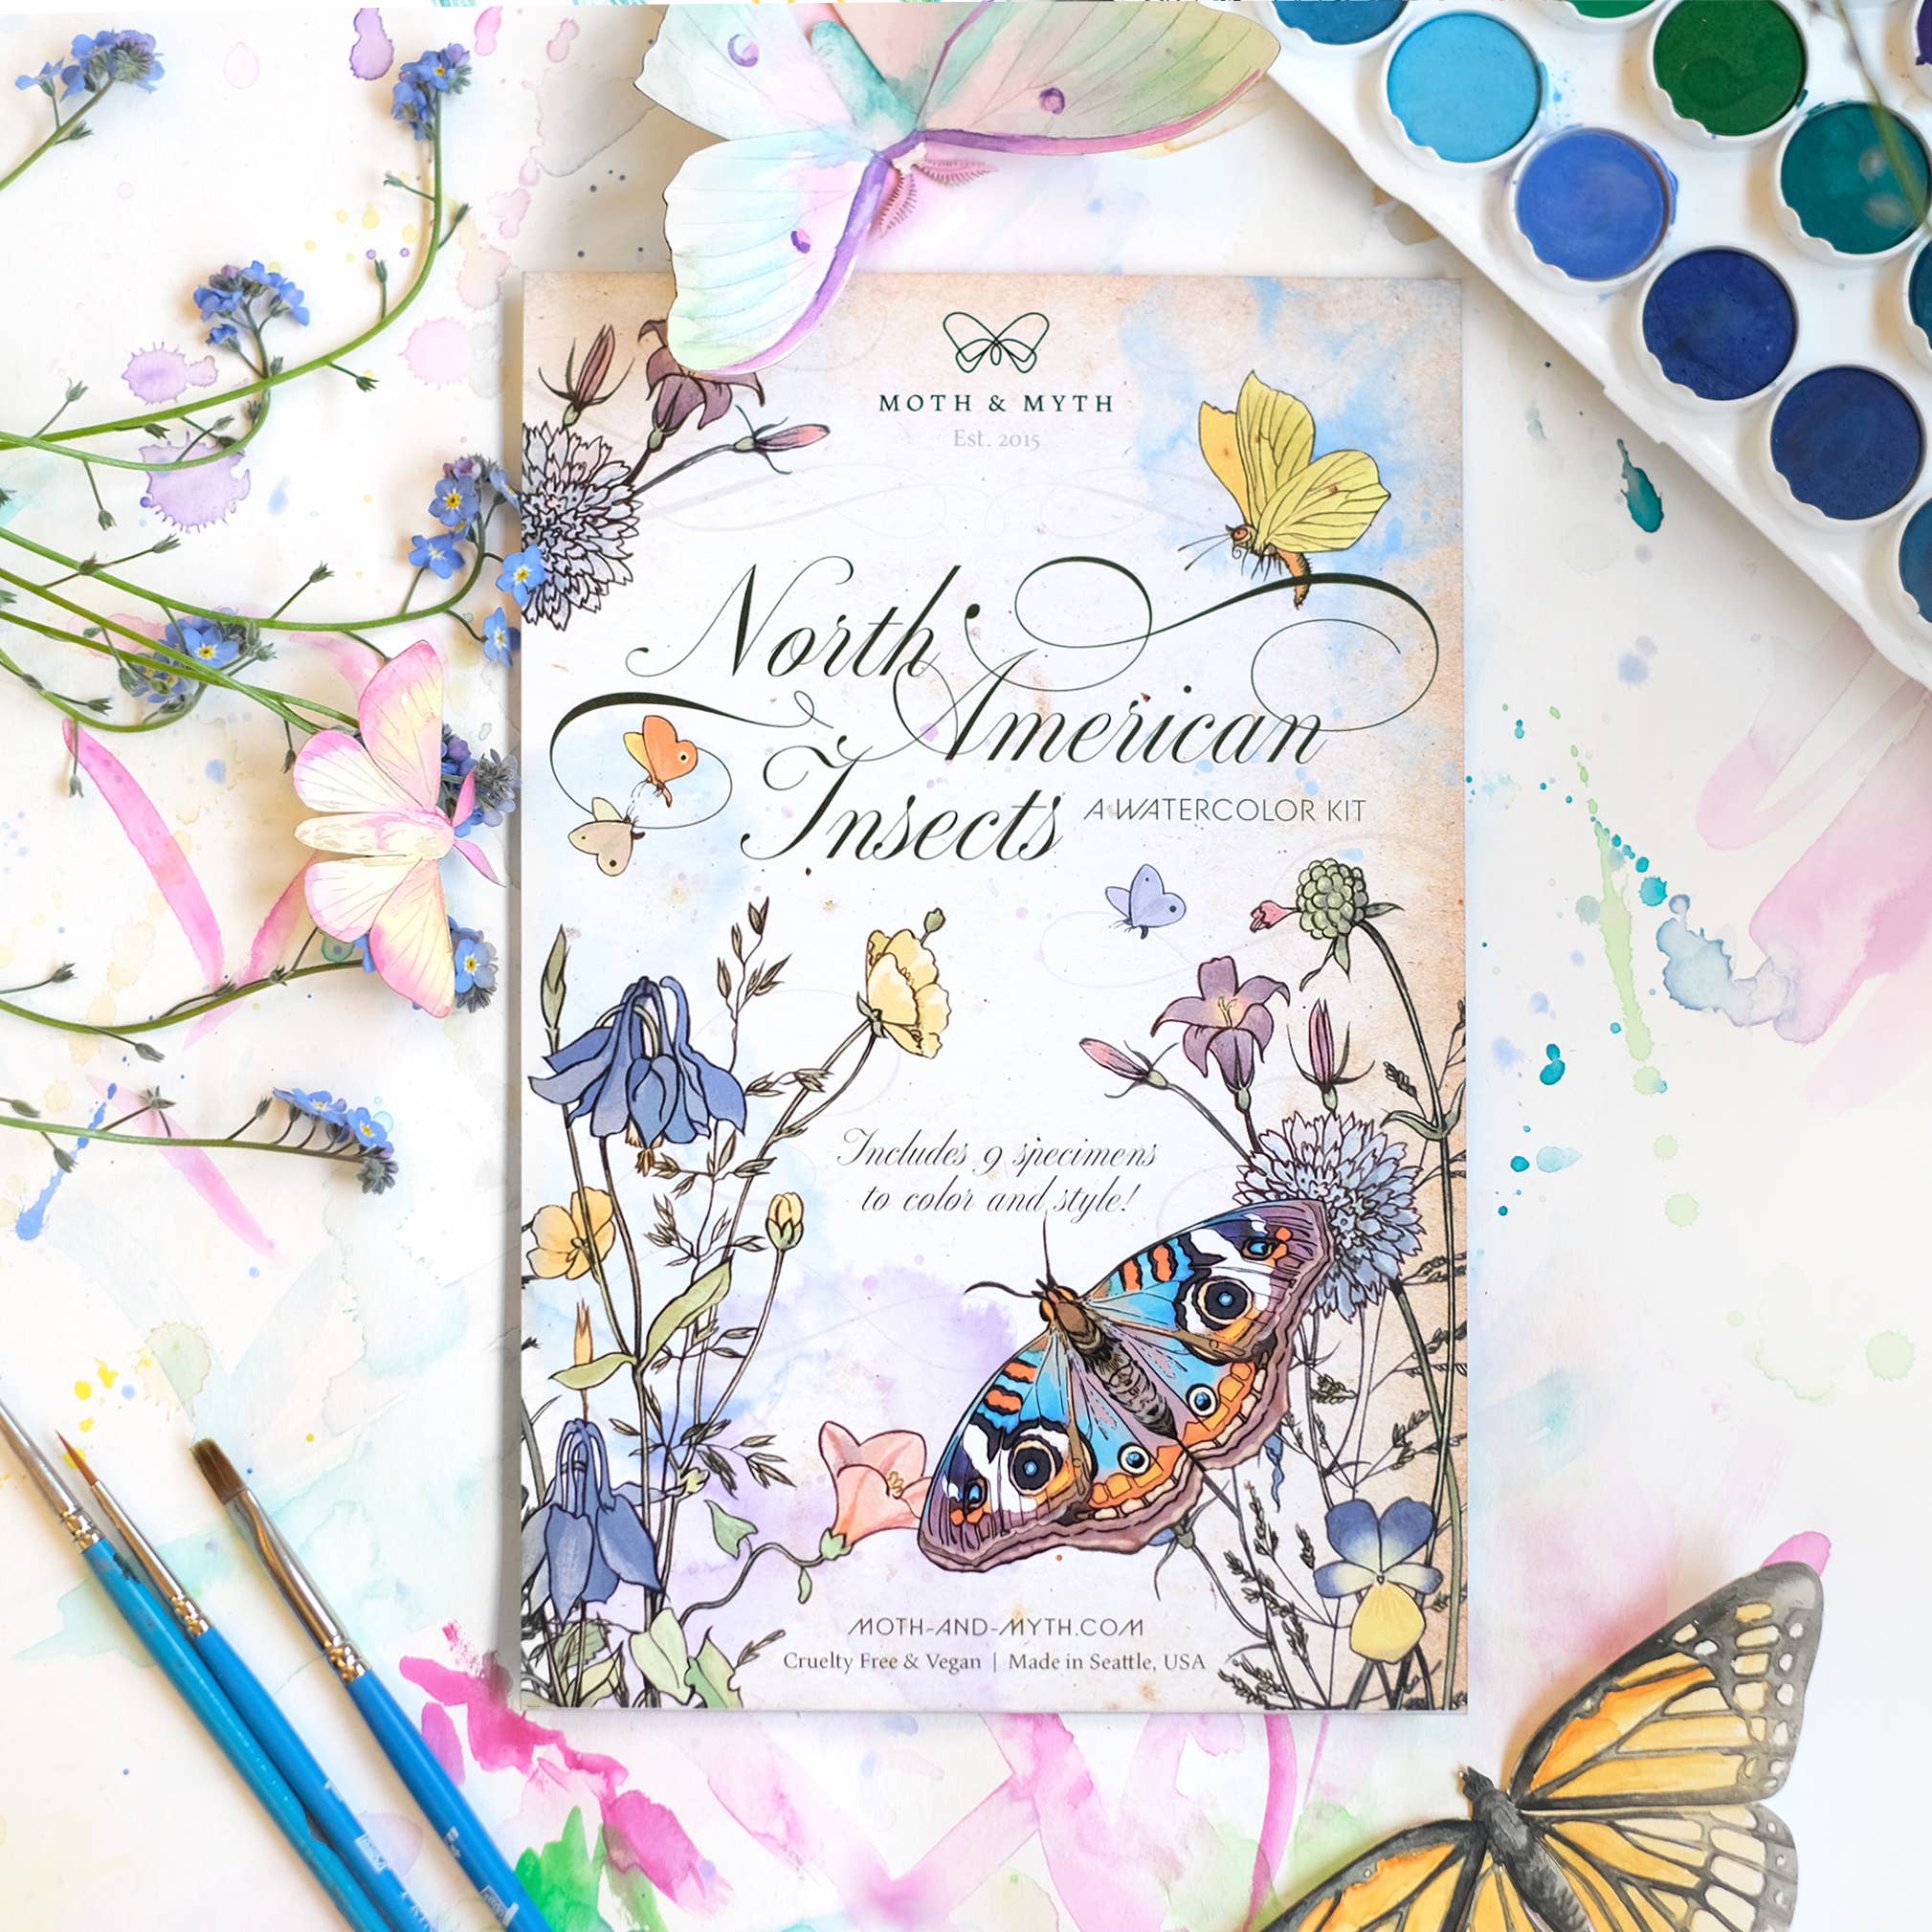 North American Insect Watercolor Kit